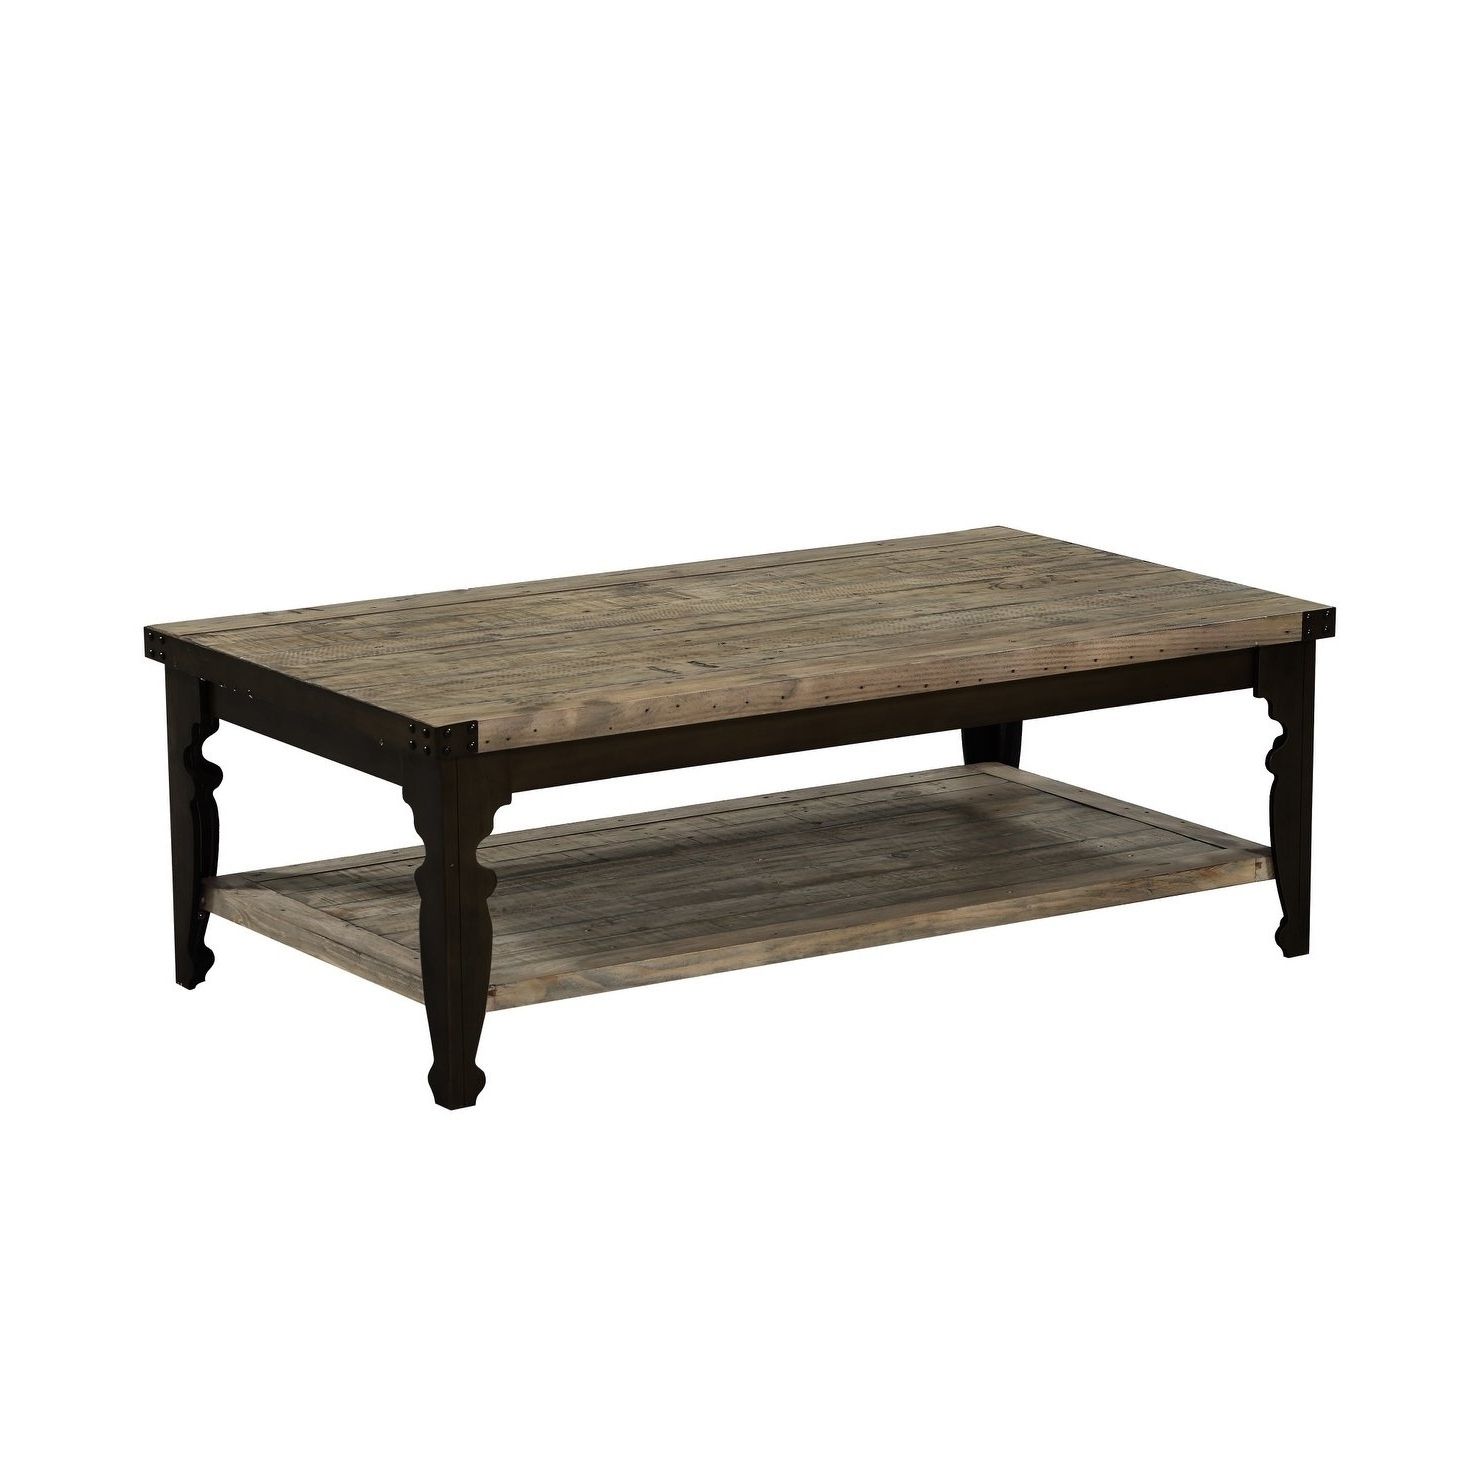 Best And Newest Reclaimed Pine Coffee Tables Throughout Shop Emerald Home Valencia Reclaimed Pine Coffee Table – On Sale (View 11 of 20)